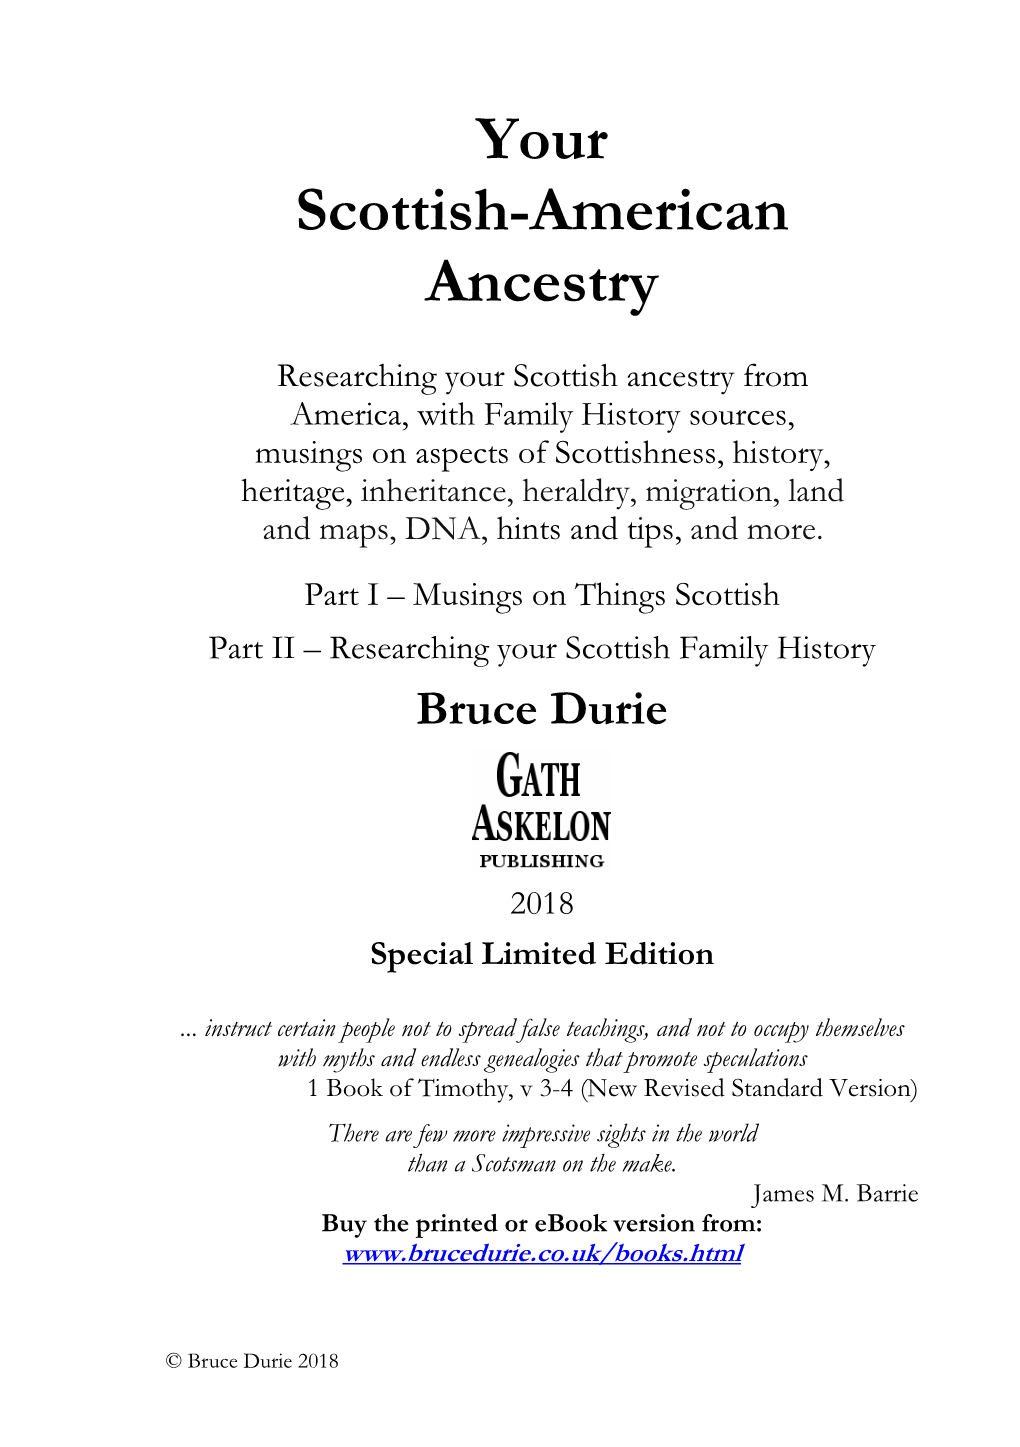 Your Scottish-American Ancestry